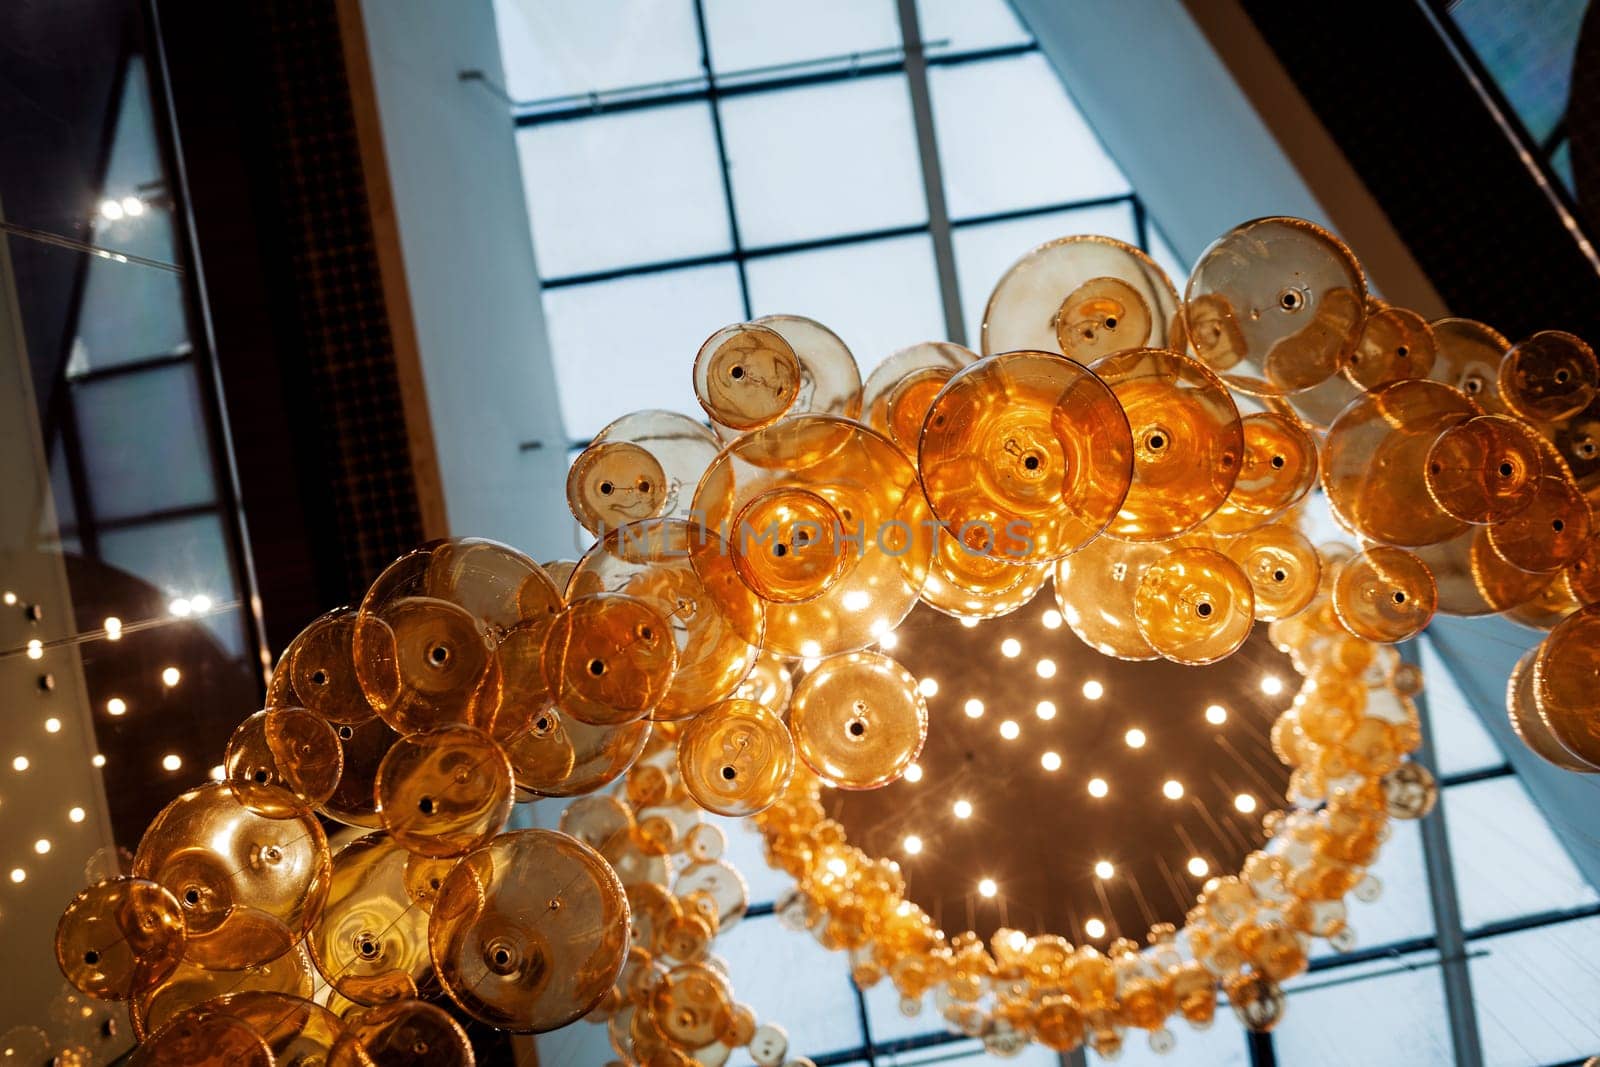 Many large glass lamps hang from the ceiling of the mall